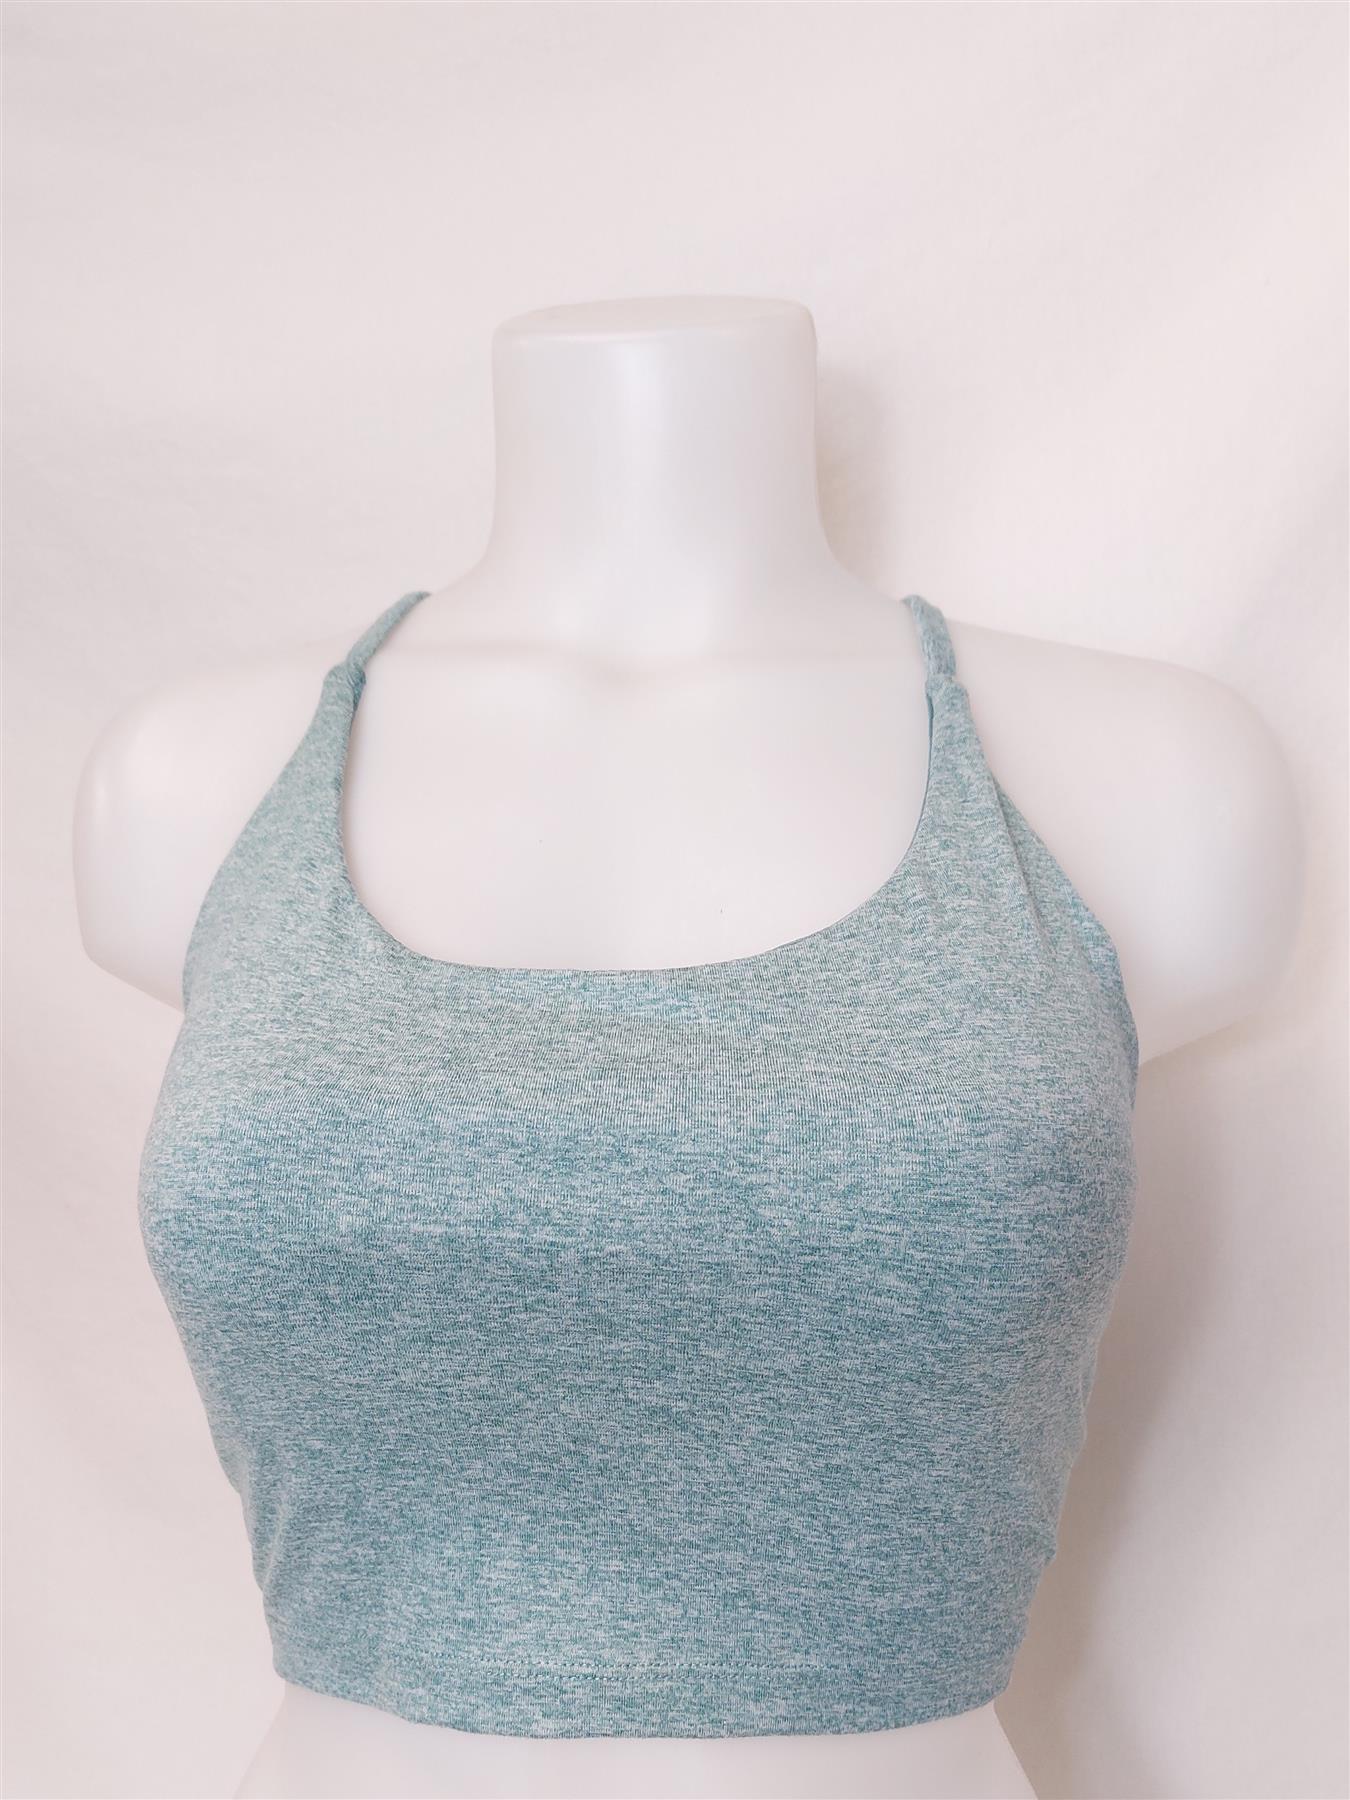 Balance Collection Crop Top Yoga Top Sports Bra Padded Non-Wired Dance Fitness